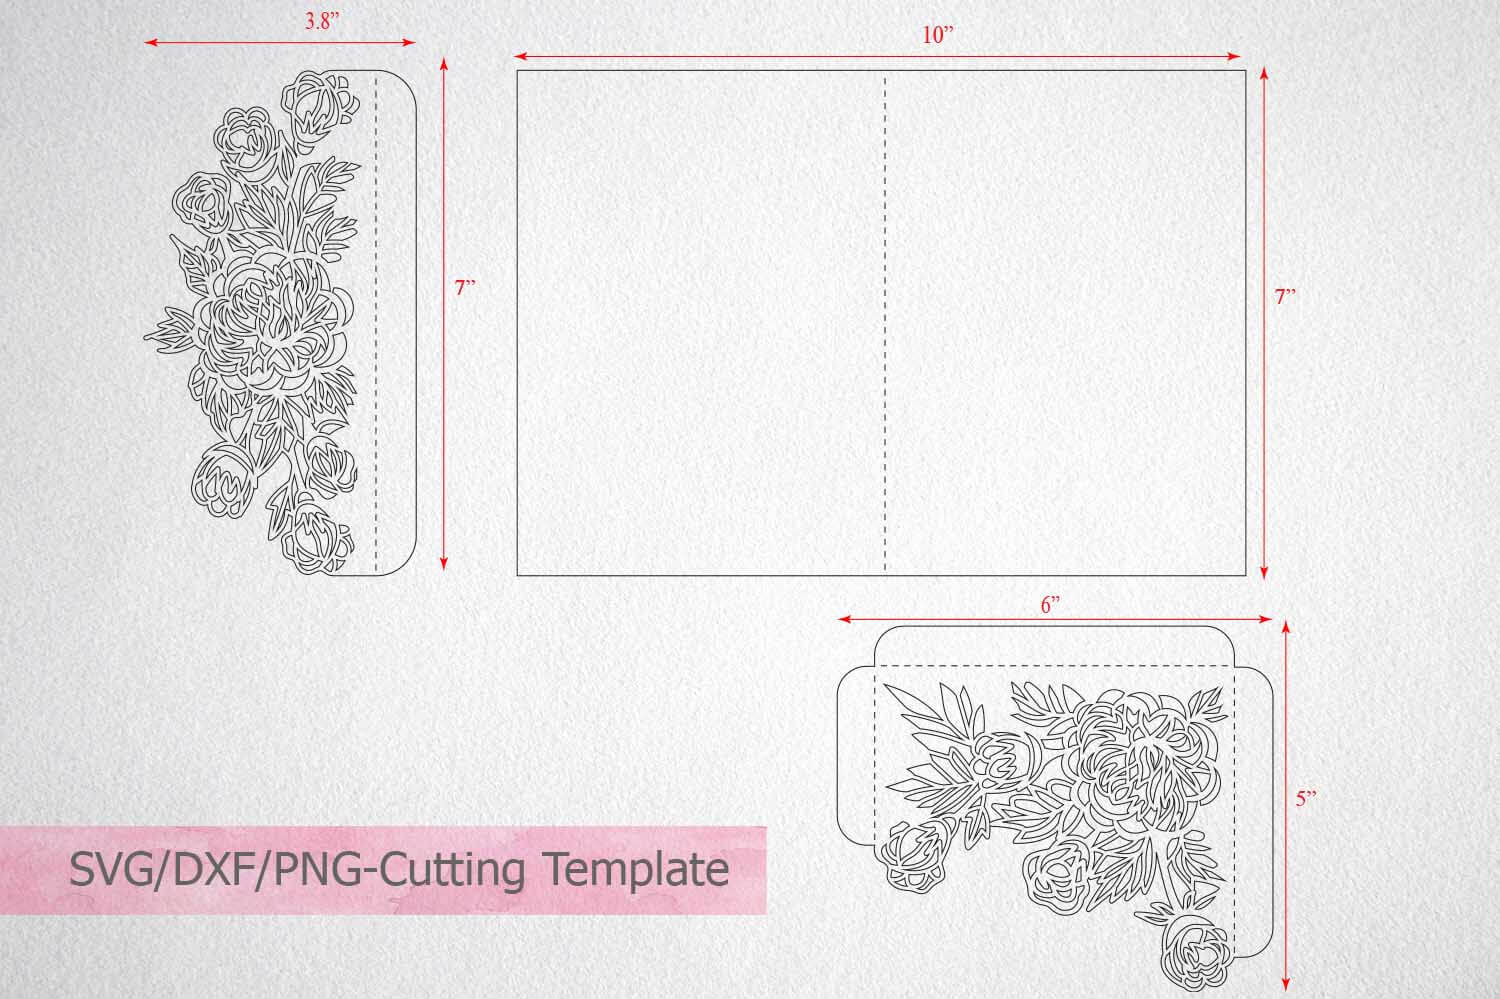 Tri Fold Wedding Invitation Card Template Laser Cut Sxg Dxf Intended For Three Fold Card Template